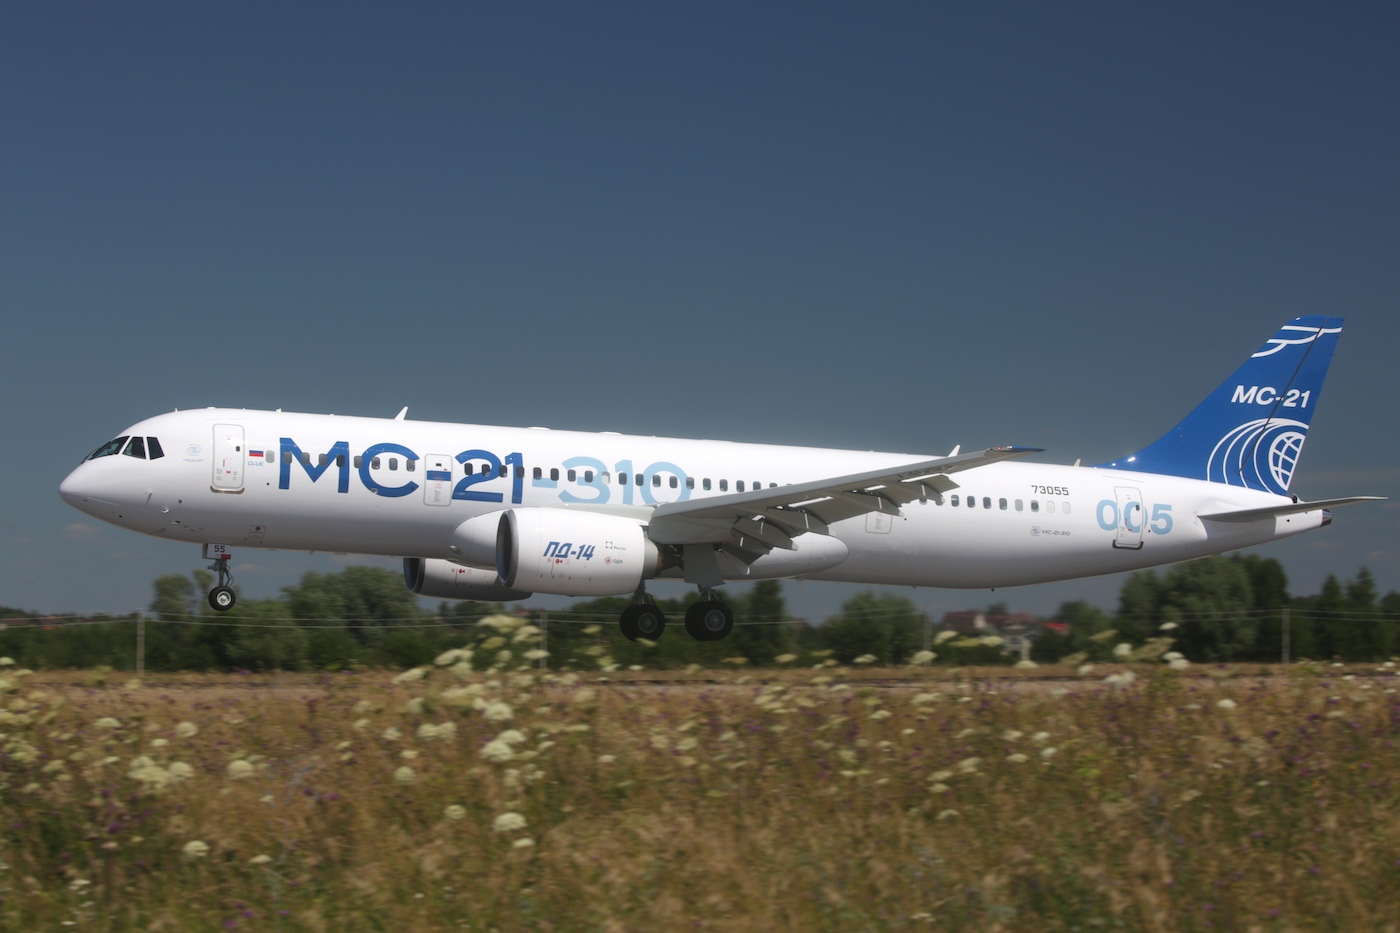 Rostec Developed Russian-Made Communication Equipment for the MC-21 Aircraft